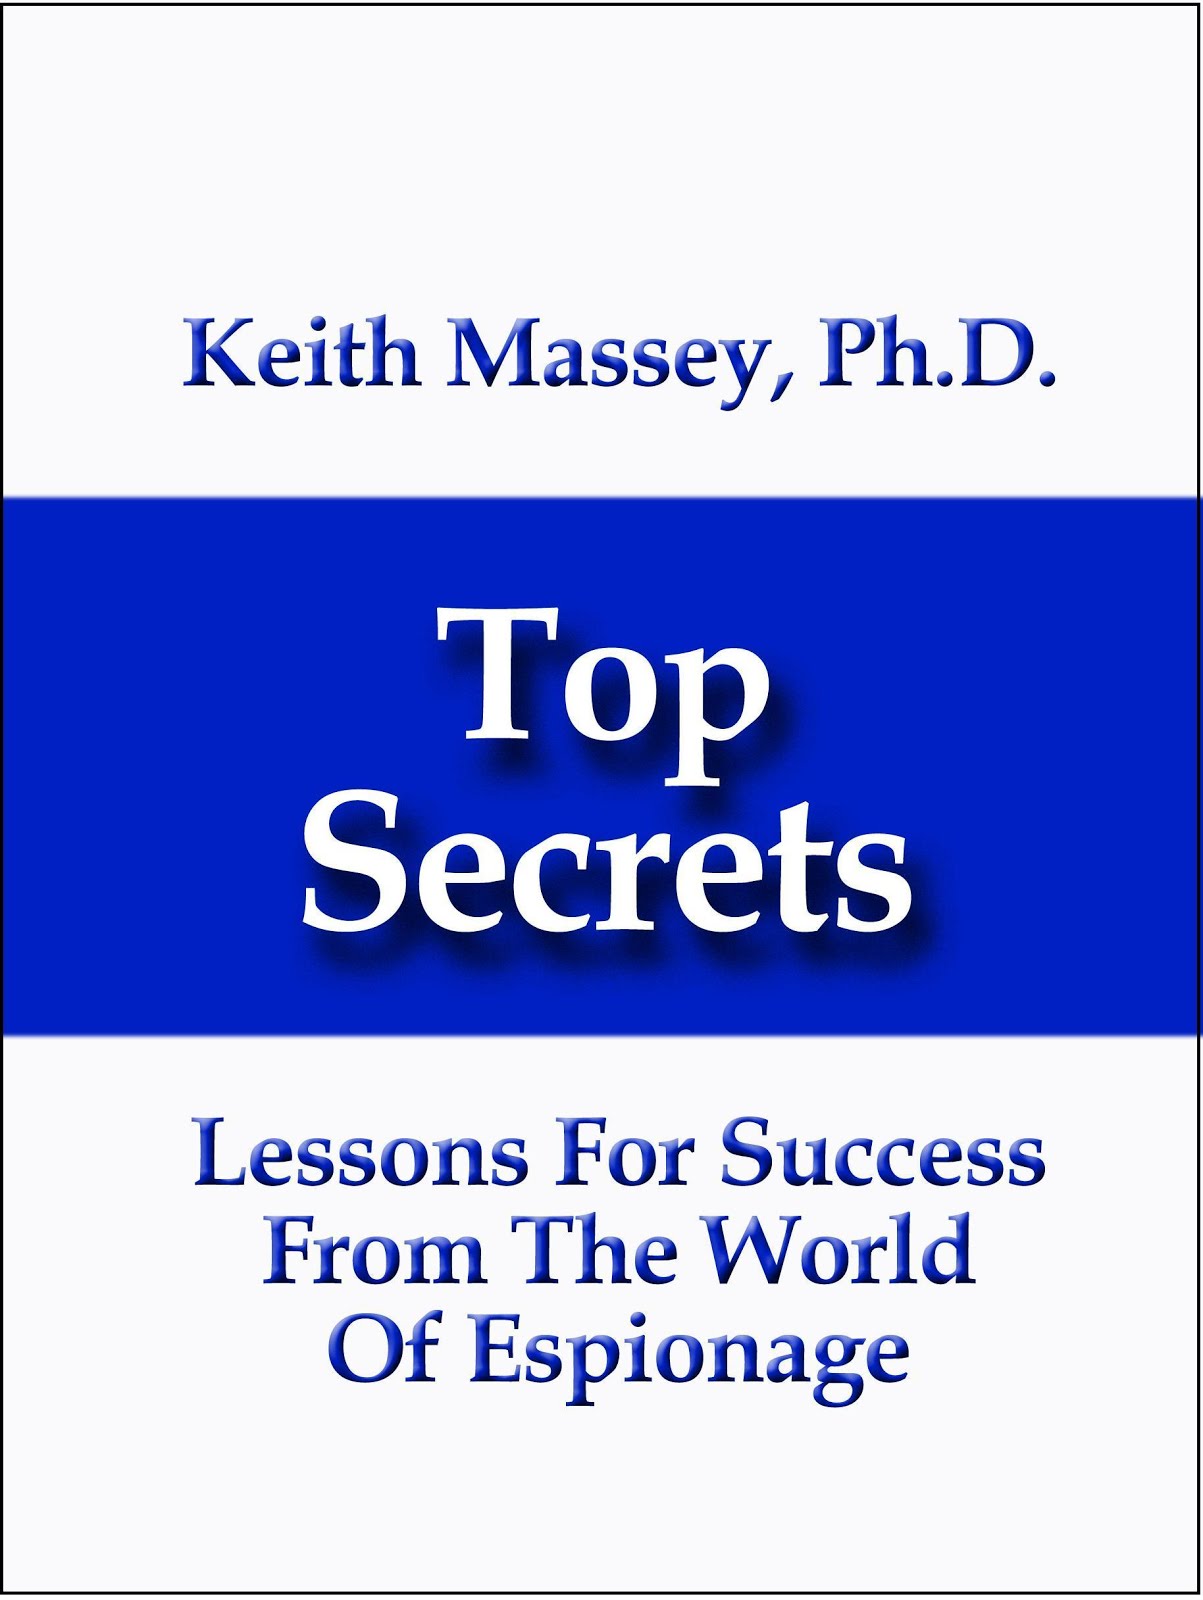 Want to know the secret to success?